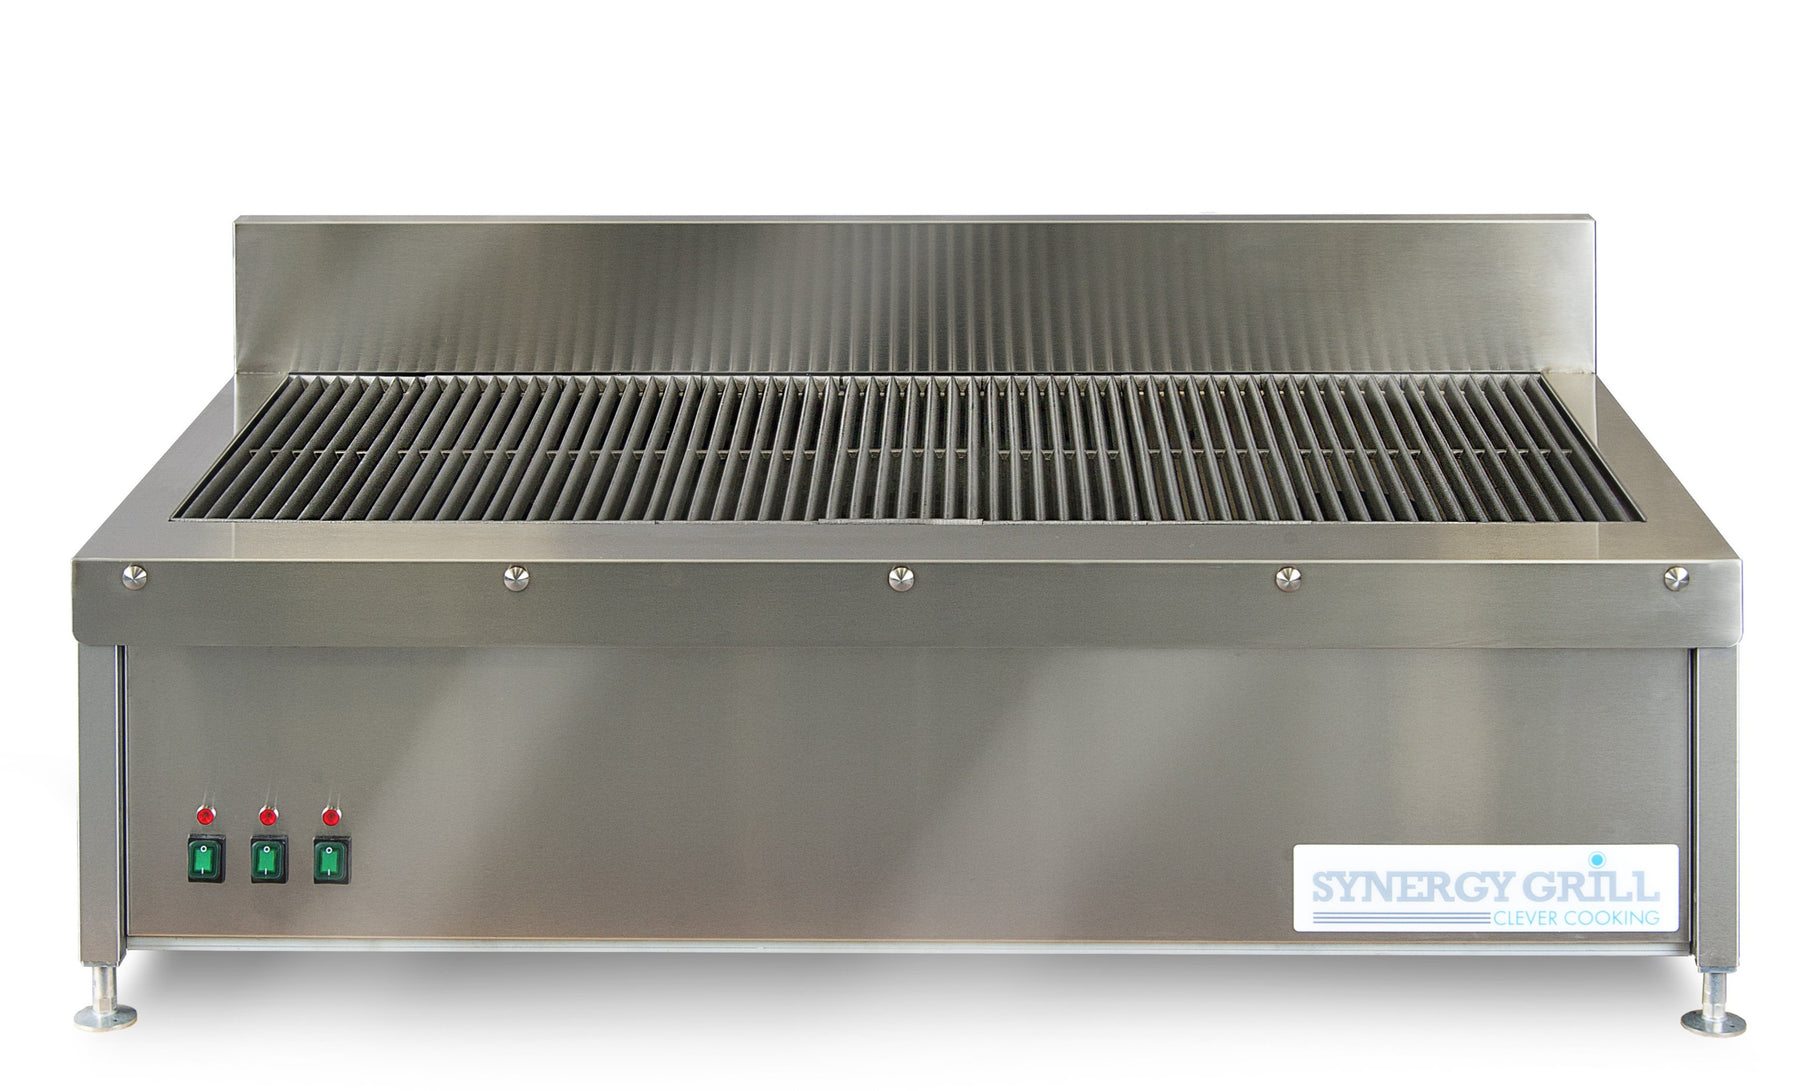 Synergy SG1300 Chargrill